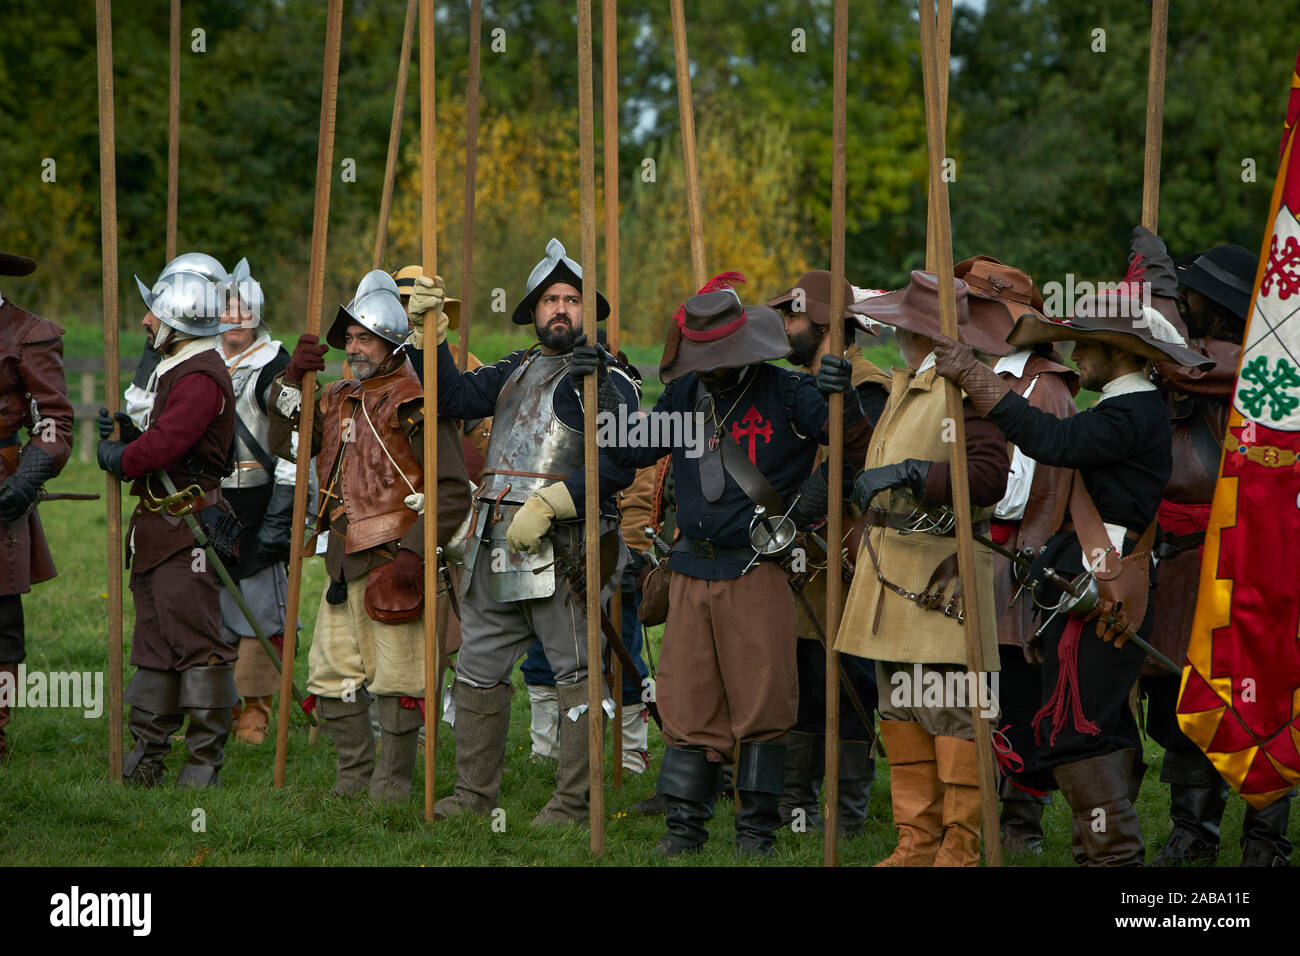 Participants of the event rehearse how to walk in formation before the representation of the battle. Stock Photo